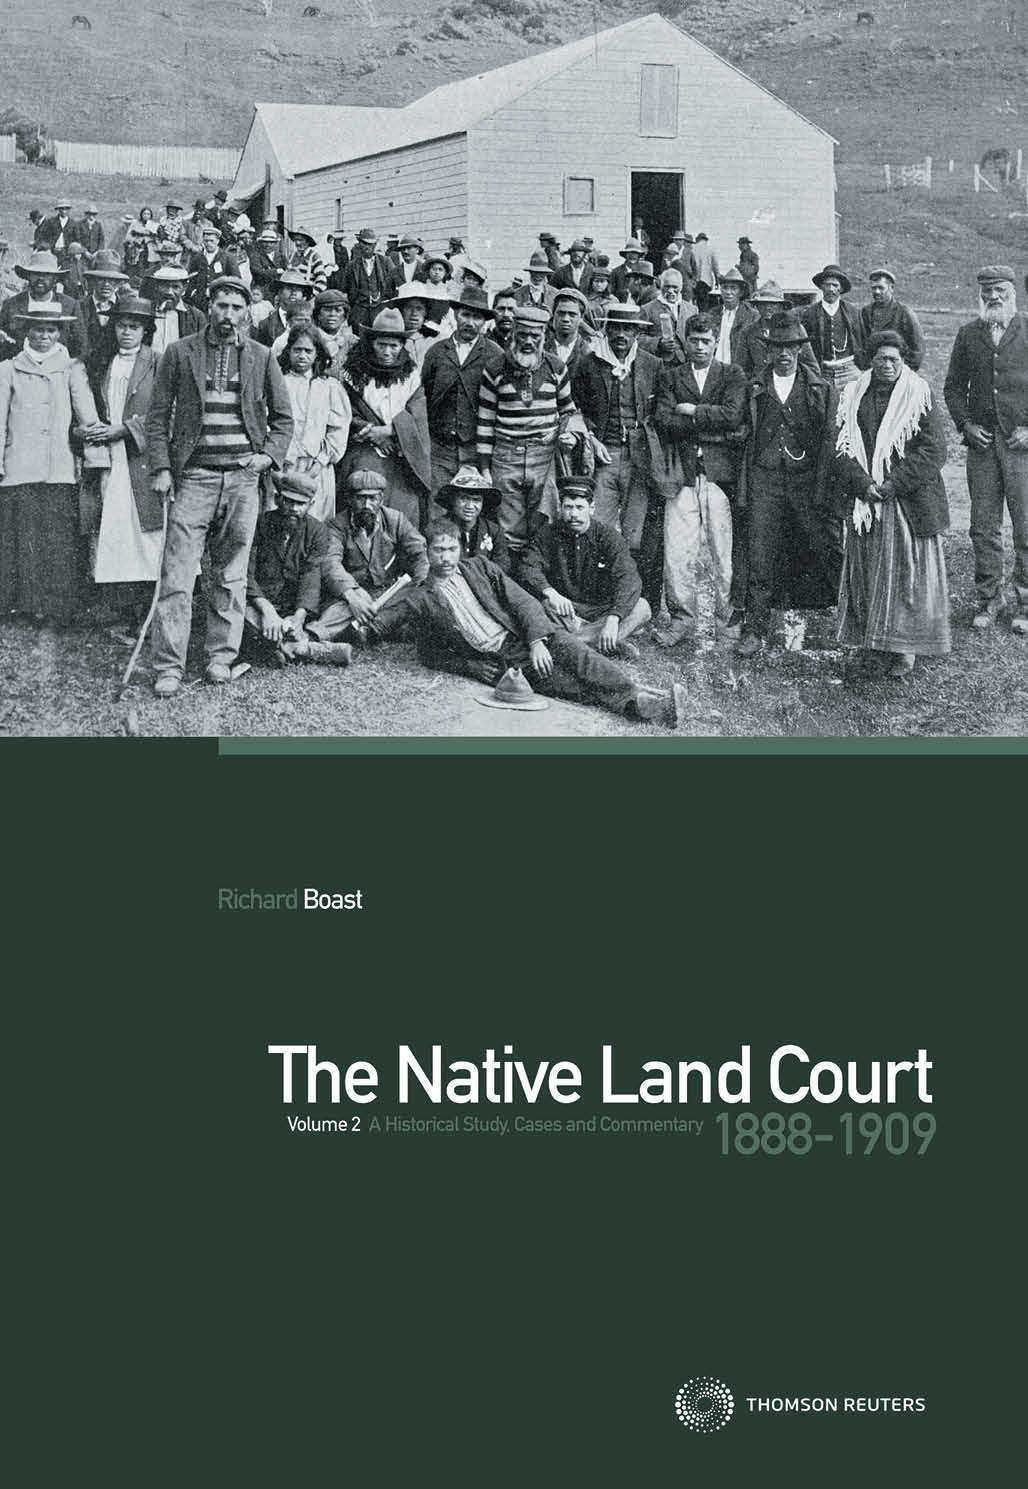 The Native Land Court Volume 2 1888-1909: A Historical Study, Cases and Commentary (Book + eBook)